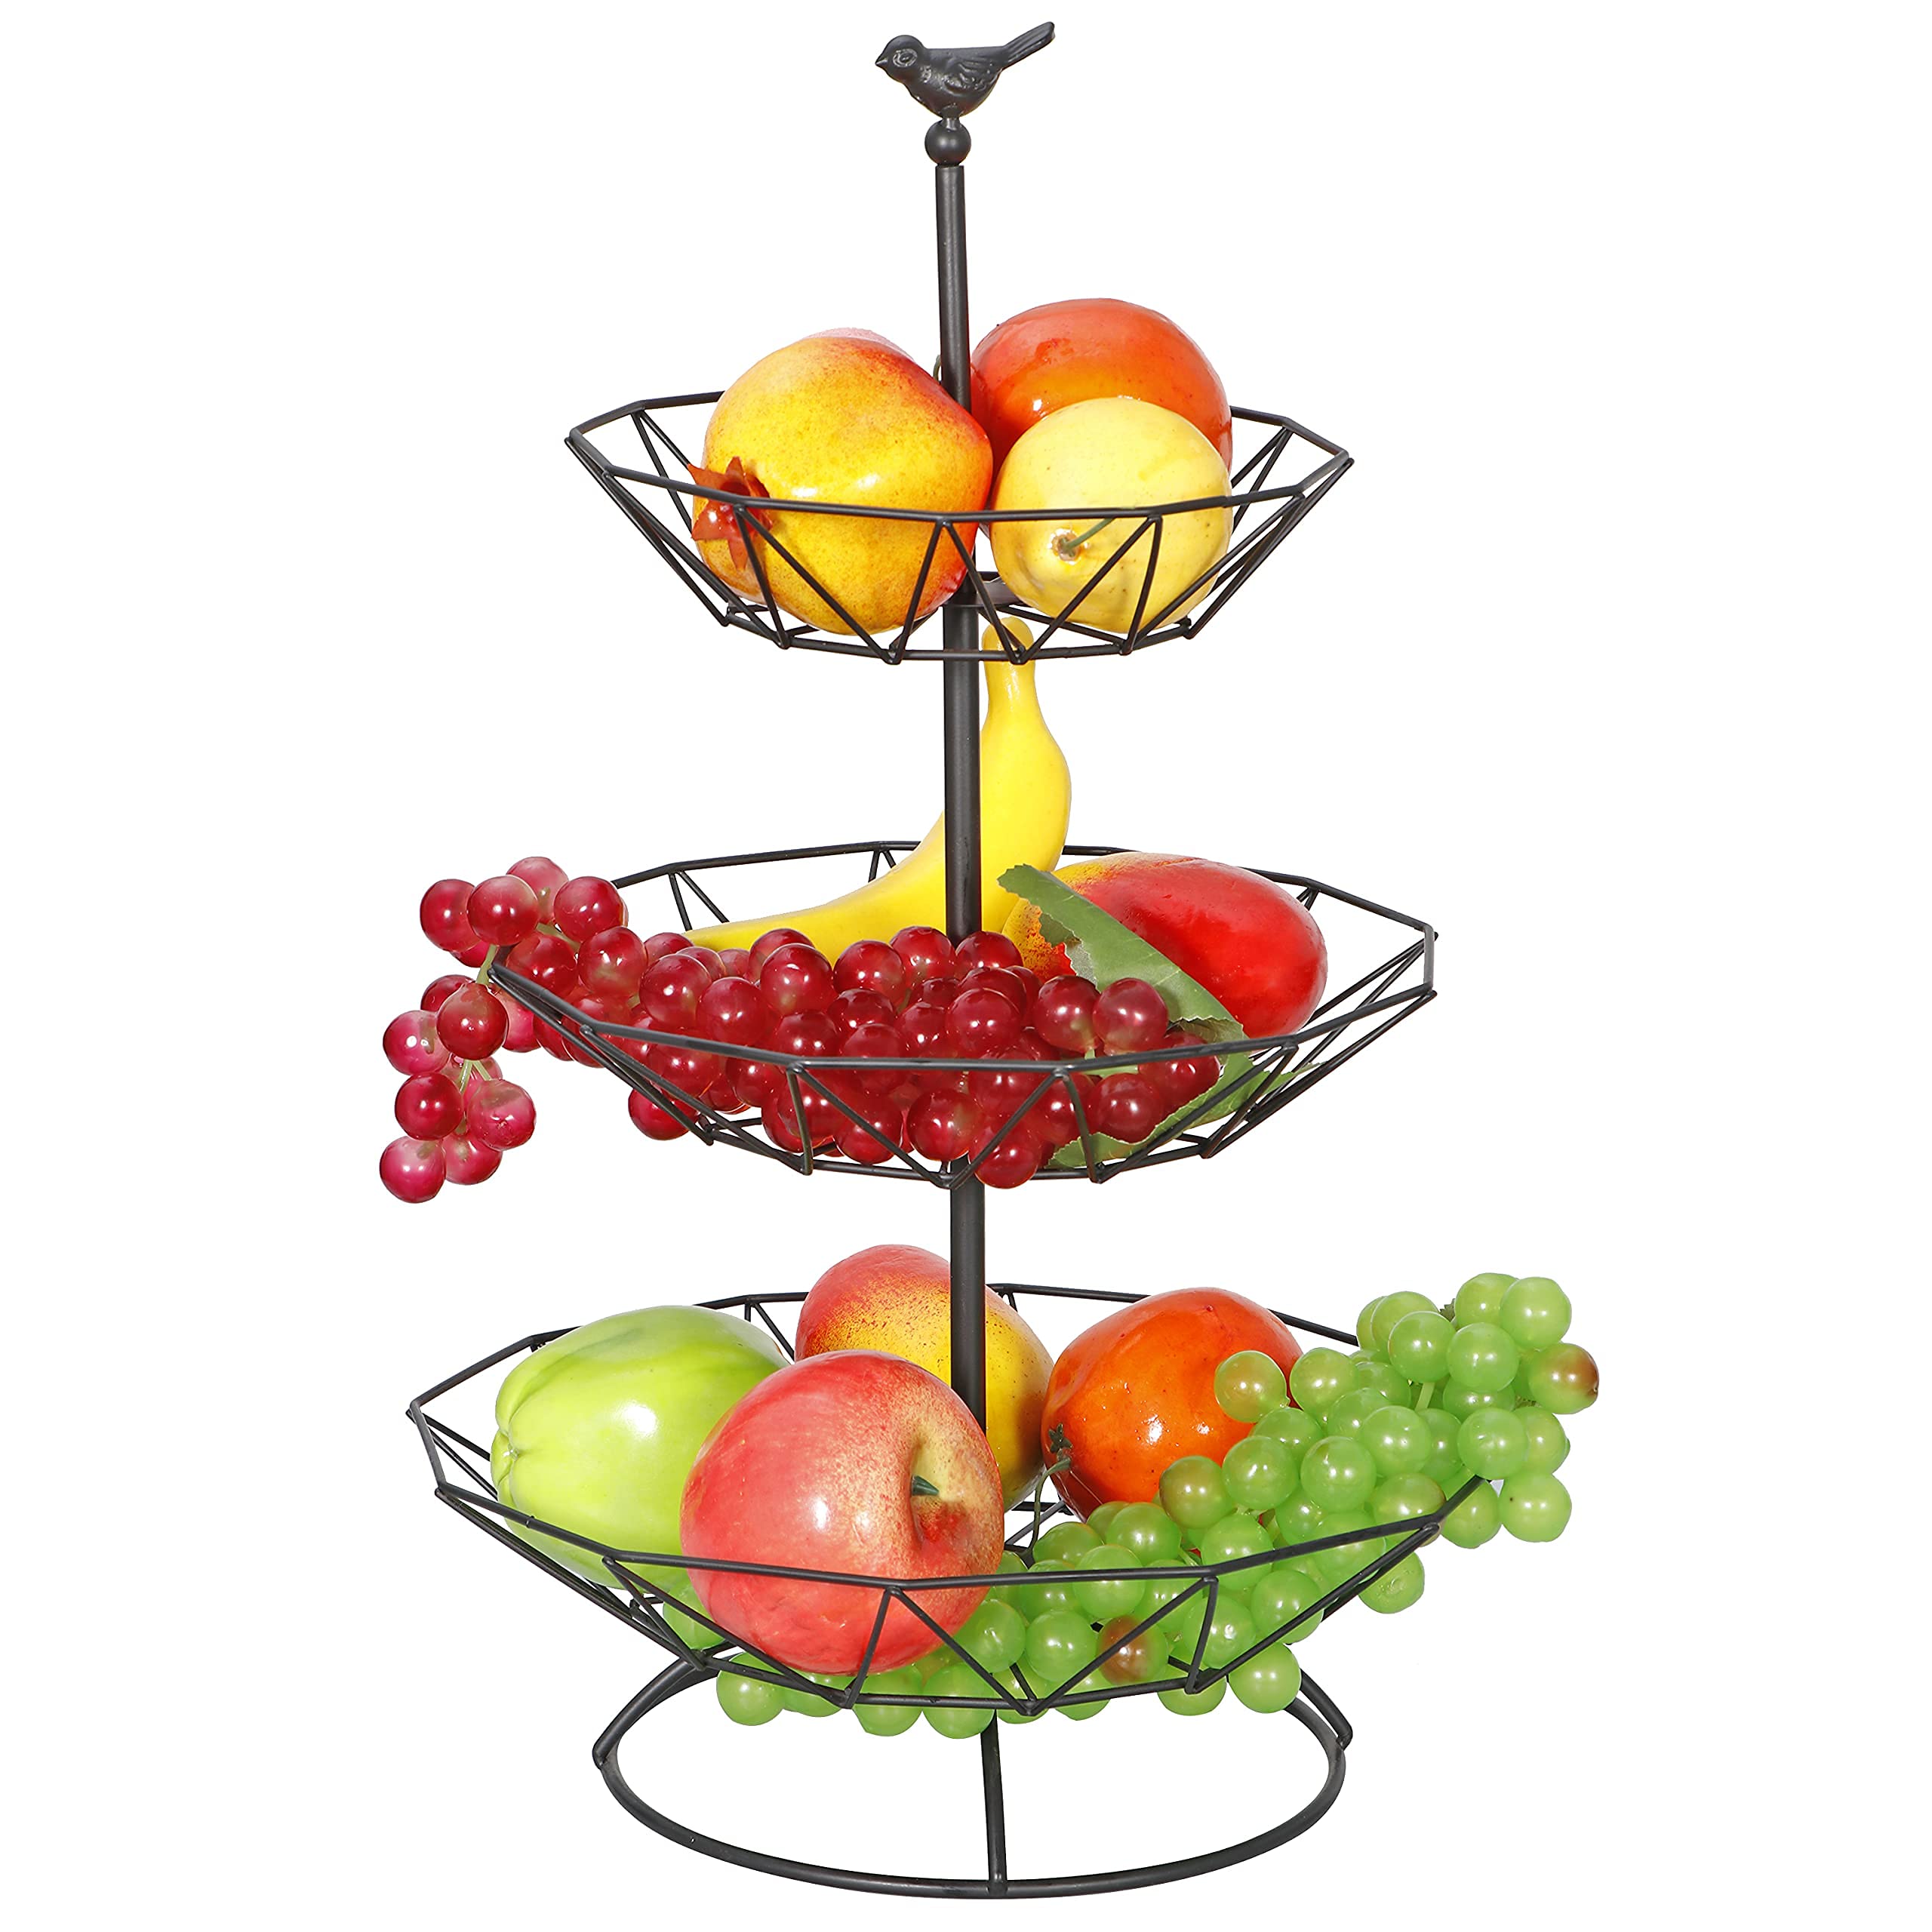 RAUVOLFIA Tabletop 3-Tier Countertop Fruit Basket Stand, Metal Fruit Bowl for Fruit, Vegetables, Bread, Comestics, Cupcakes, Snacks and Household Items